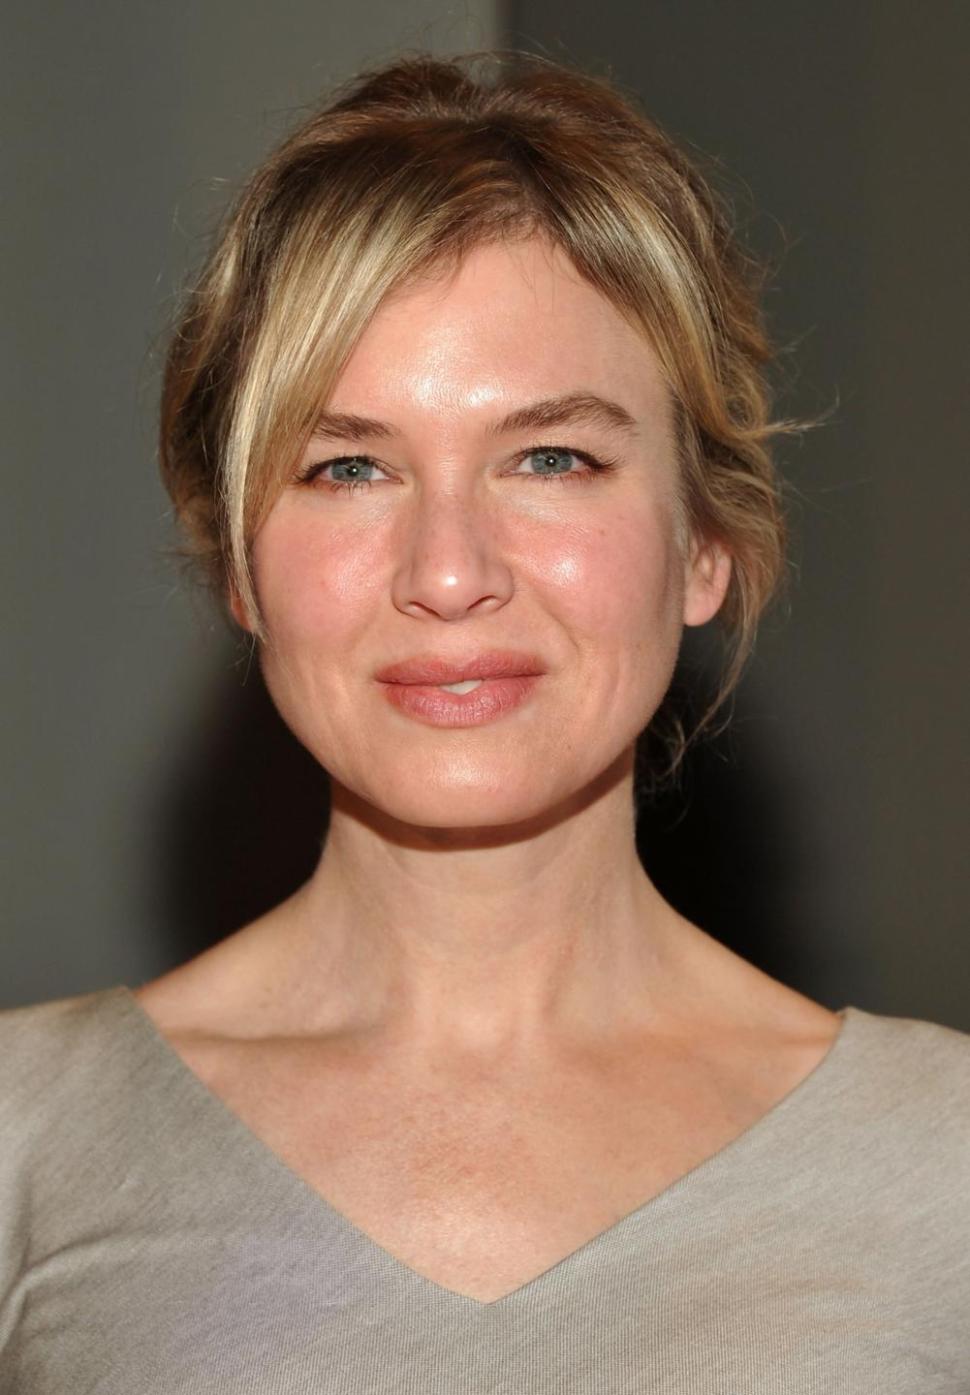 Actress Renee Zellweger attends the Carolina Herrera Spring 2012 fashion show at Lincoln Center on Sept. 12, 2011, in New York.